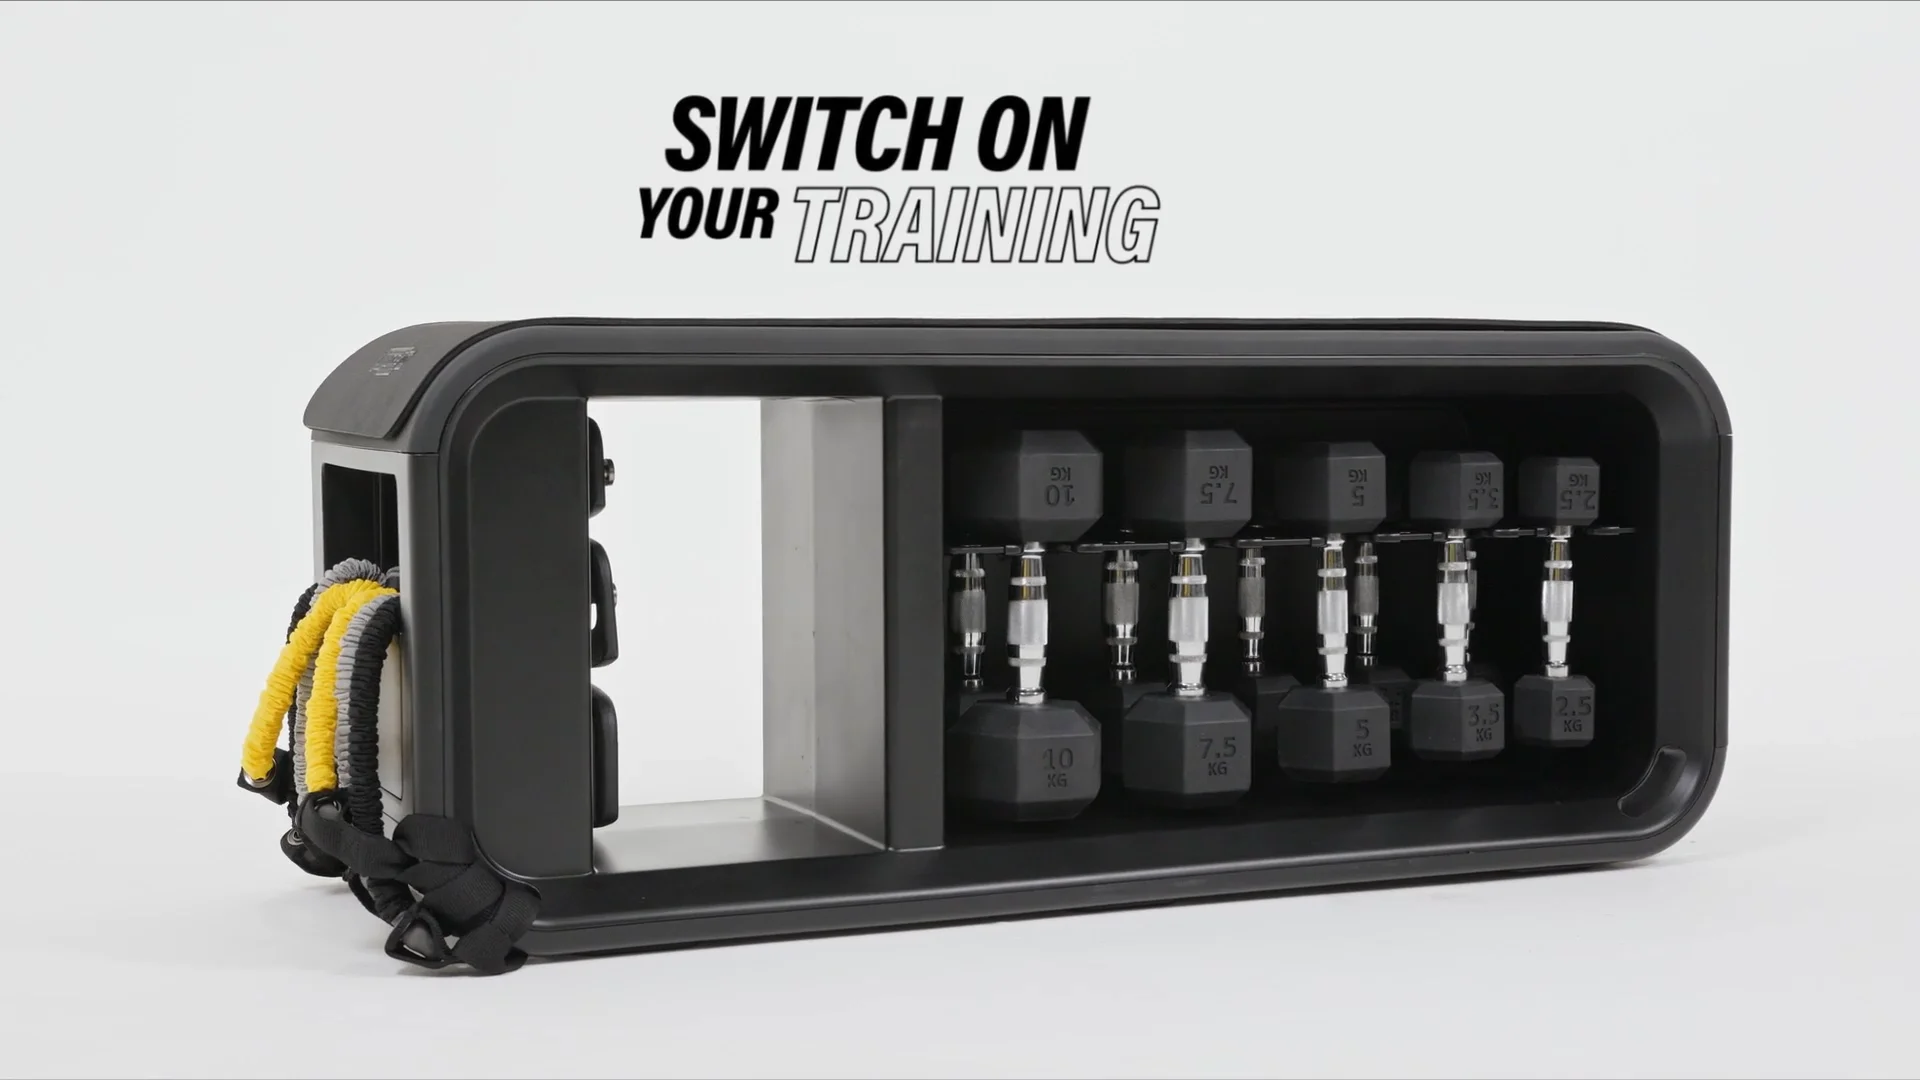 Technogym Bench Product Overview on Vimeo